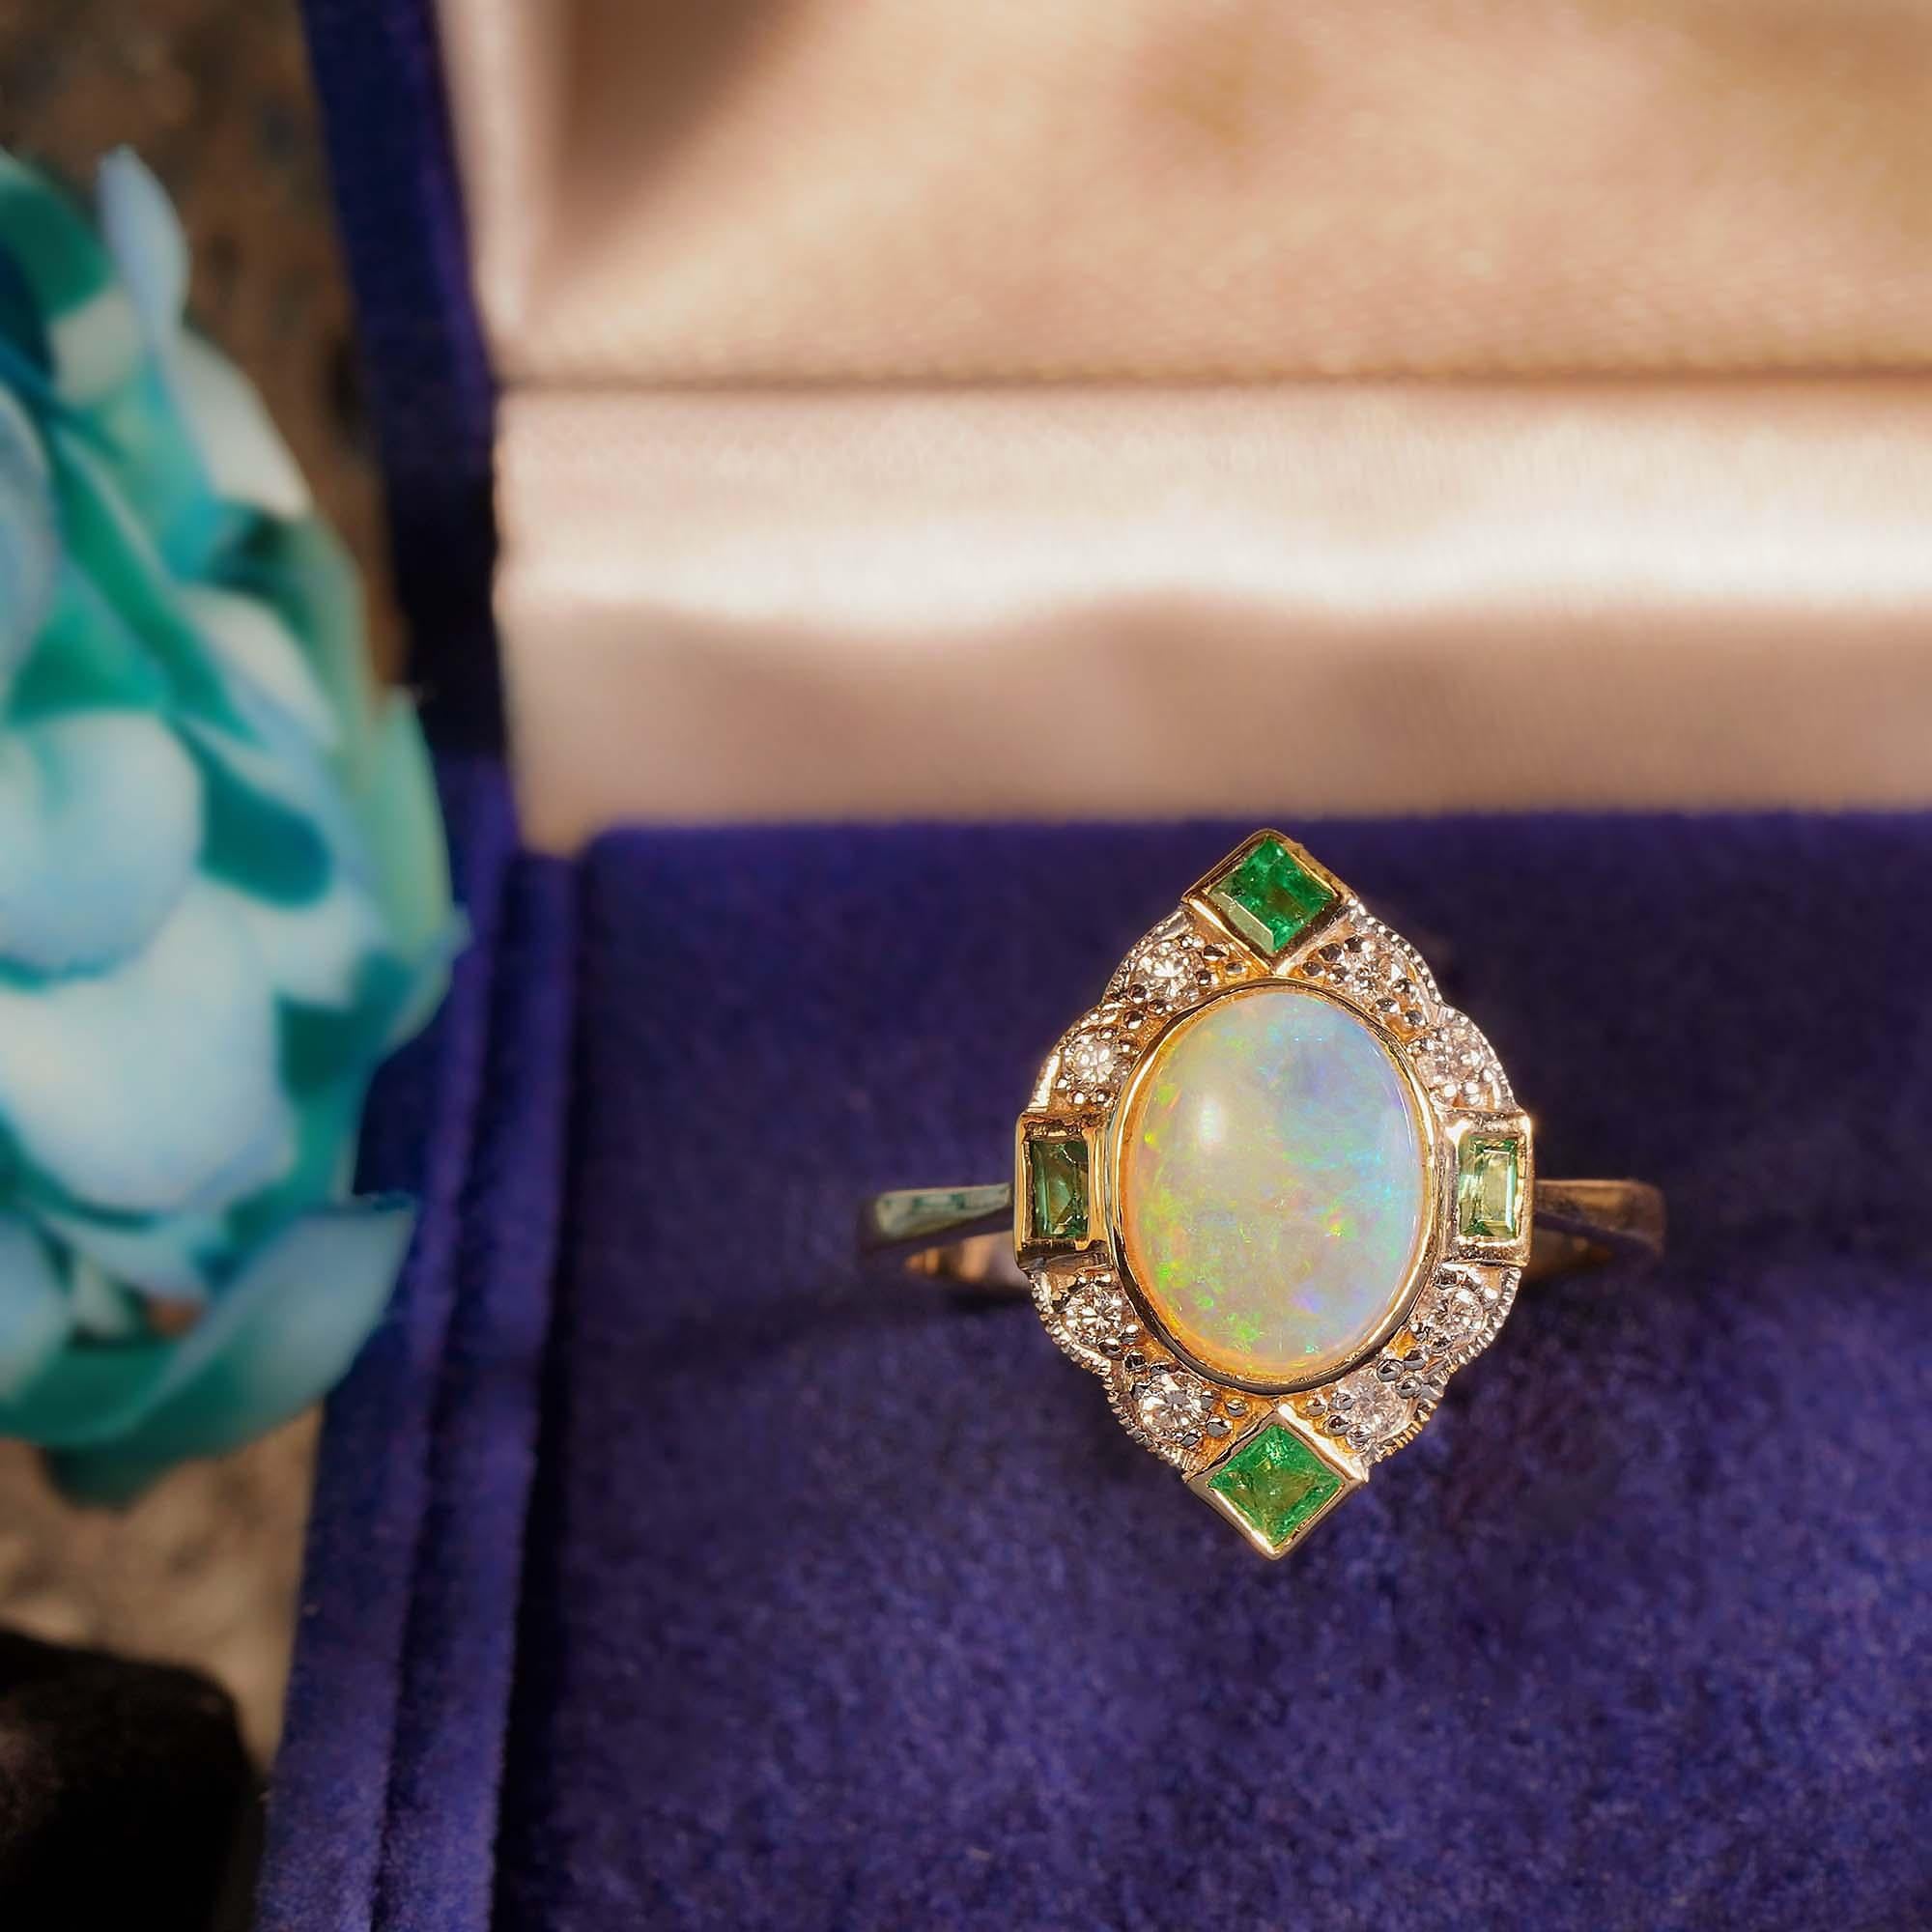 A beautiful natural cabochon Australian opal is bezel set in round diamond halo, punctuated its four with French cut emeralds. The milgrain adds to the vintage style.  

Ring Information
Style: Art-deco
Metal: 14K Yellow Gold (White top diamond